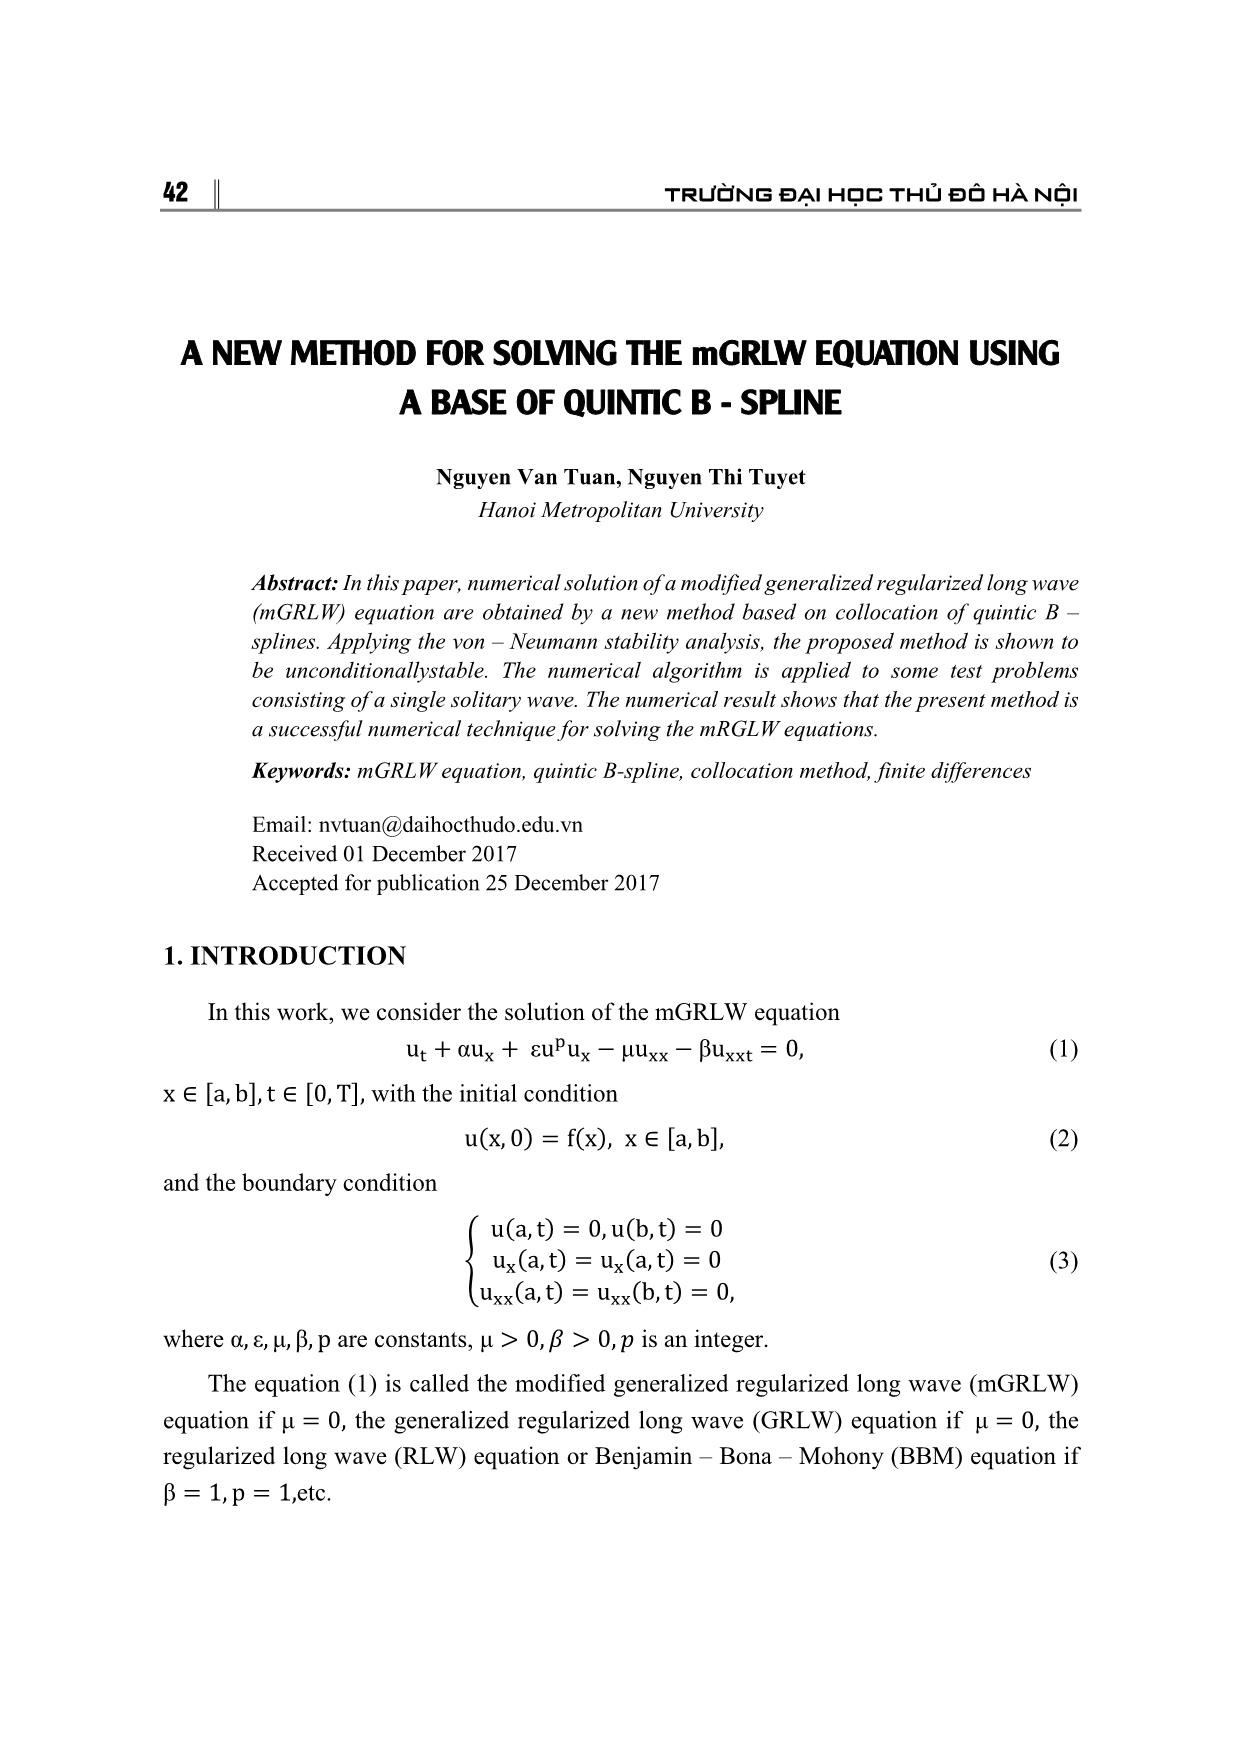 A new method for solving the mgrlw equation using a base of quintic B-Spline trang 1